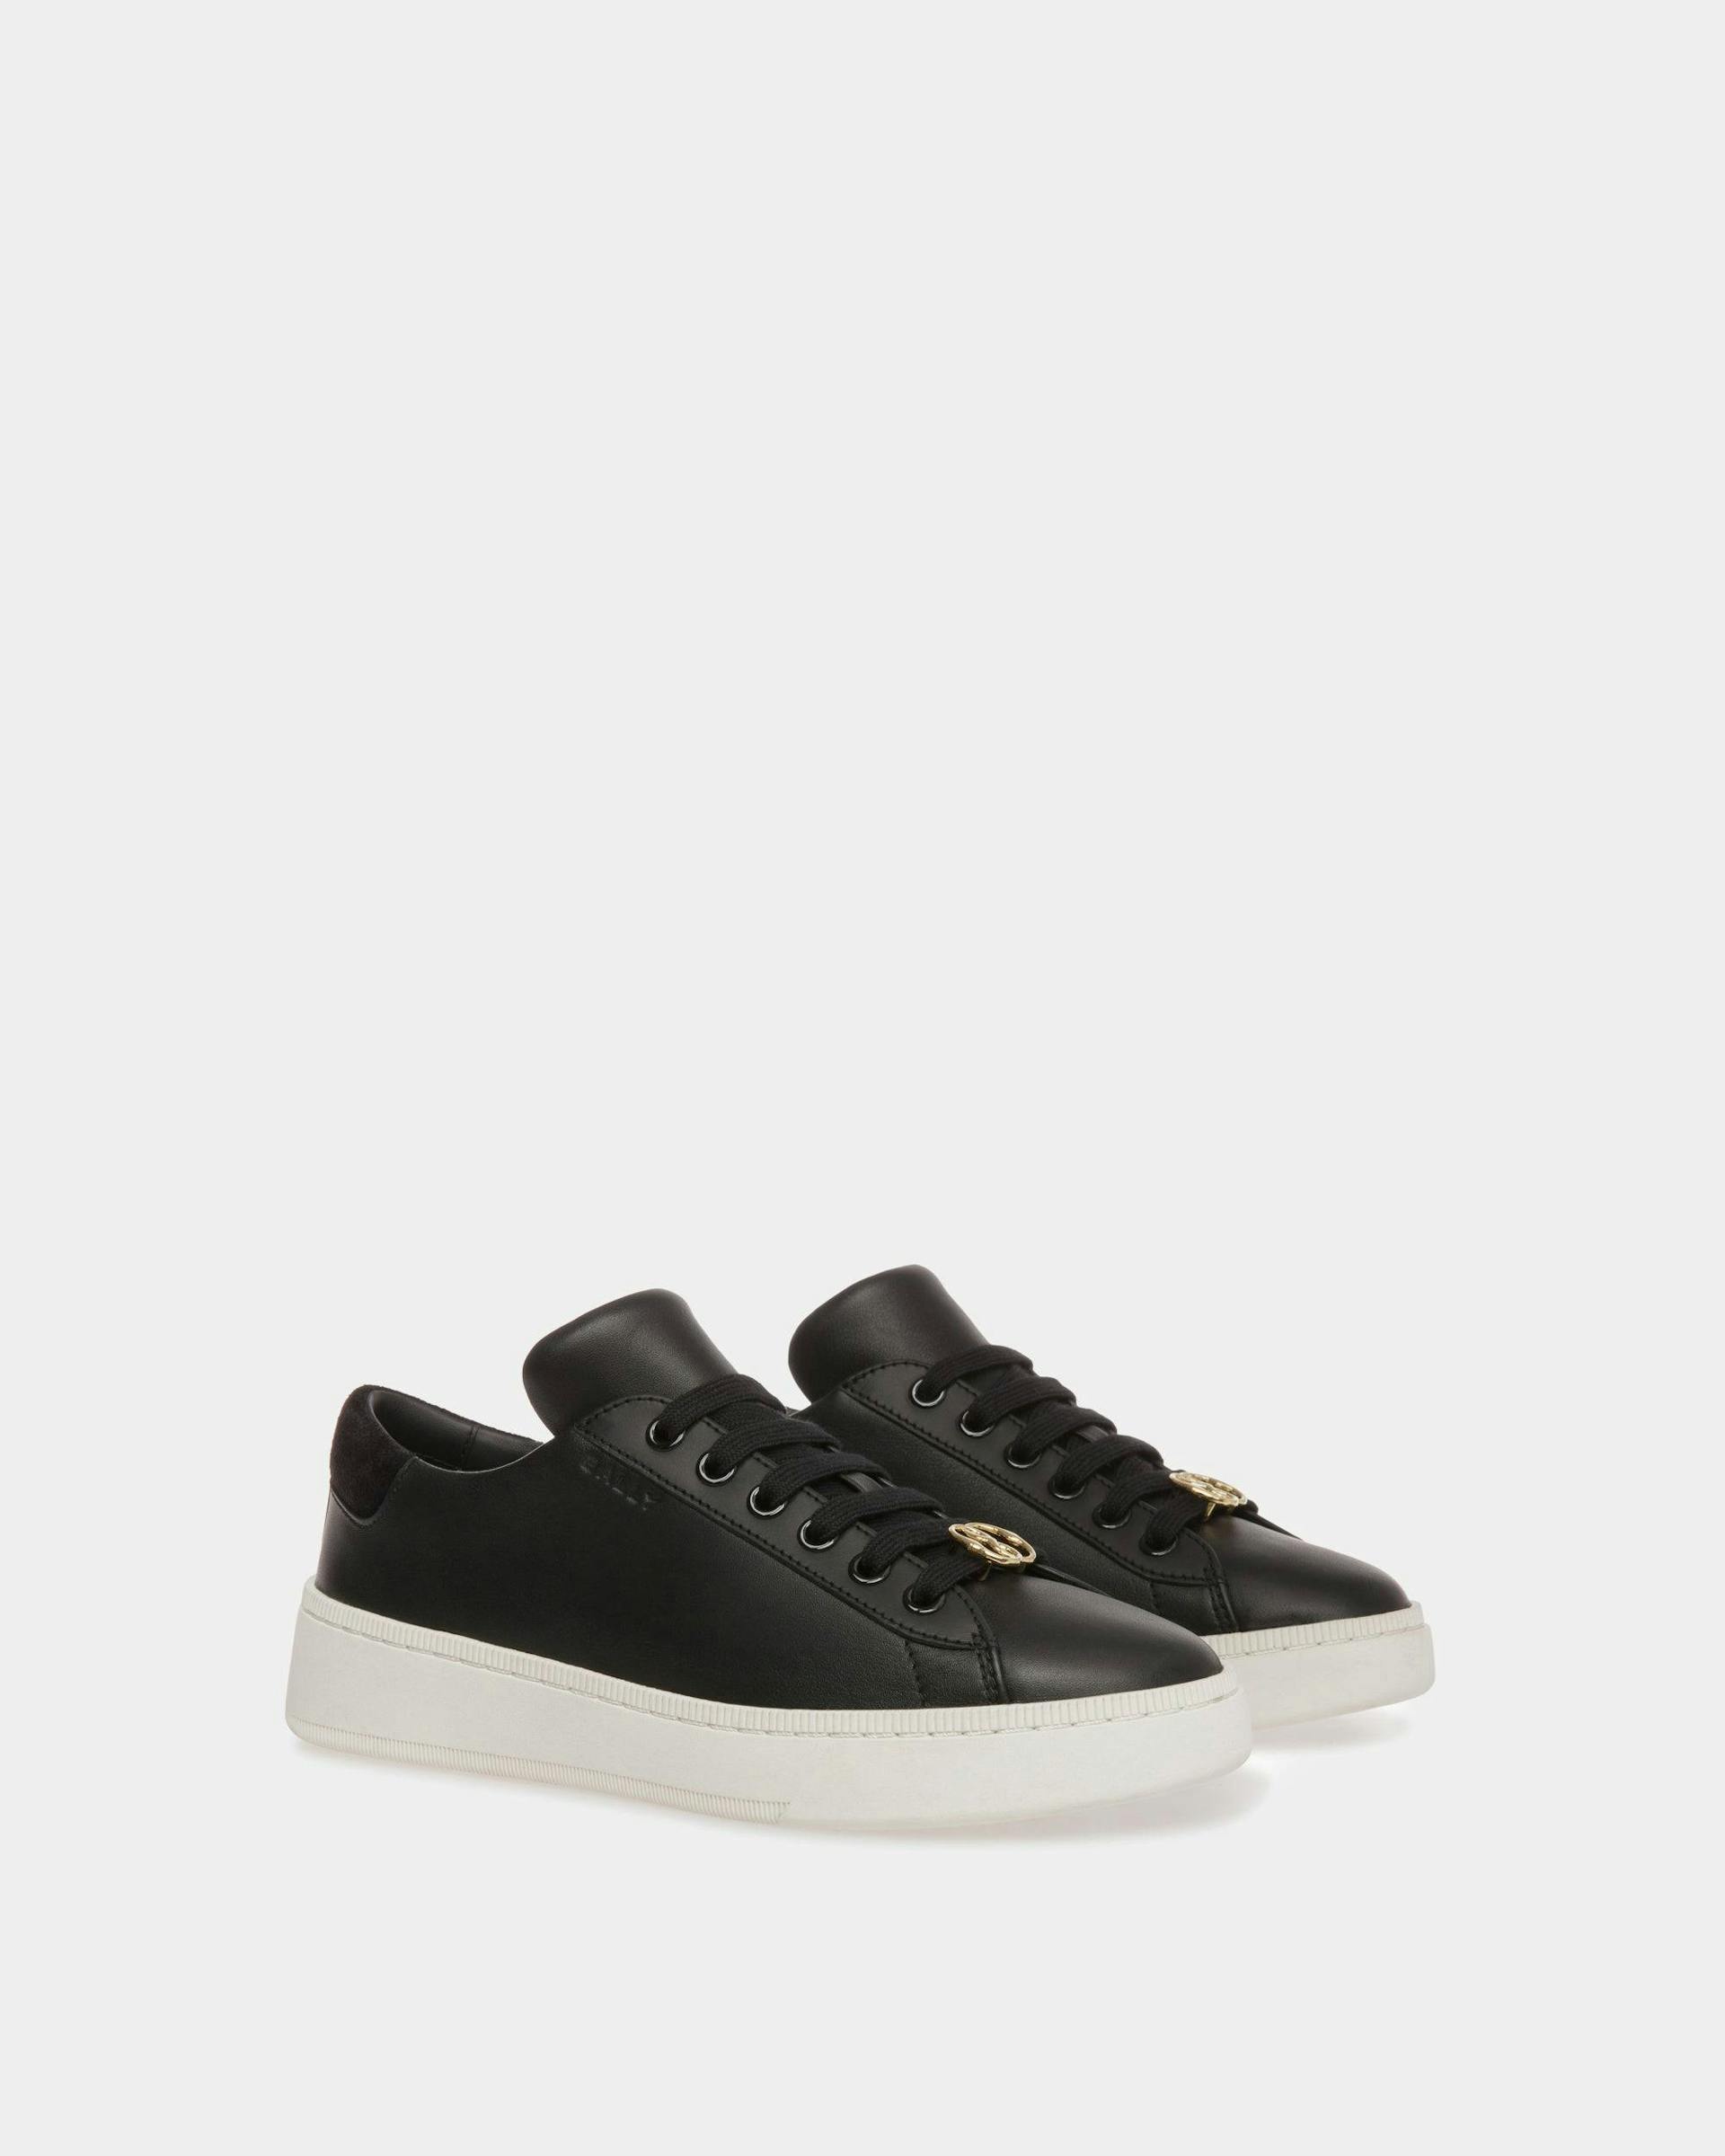 Raise Sneakers In Black And White Leather - Women's - Bally - 03